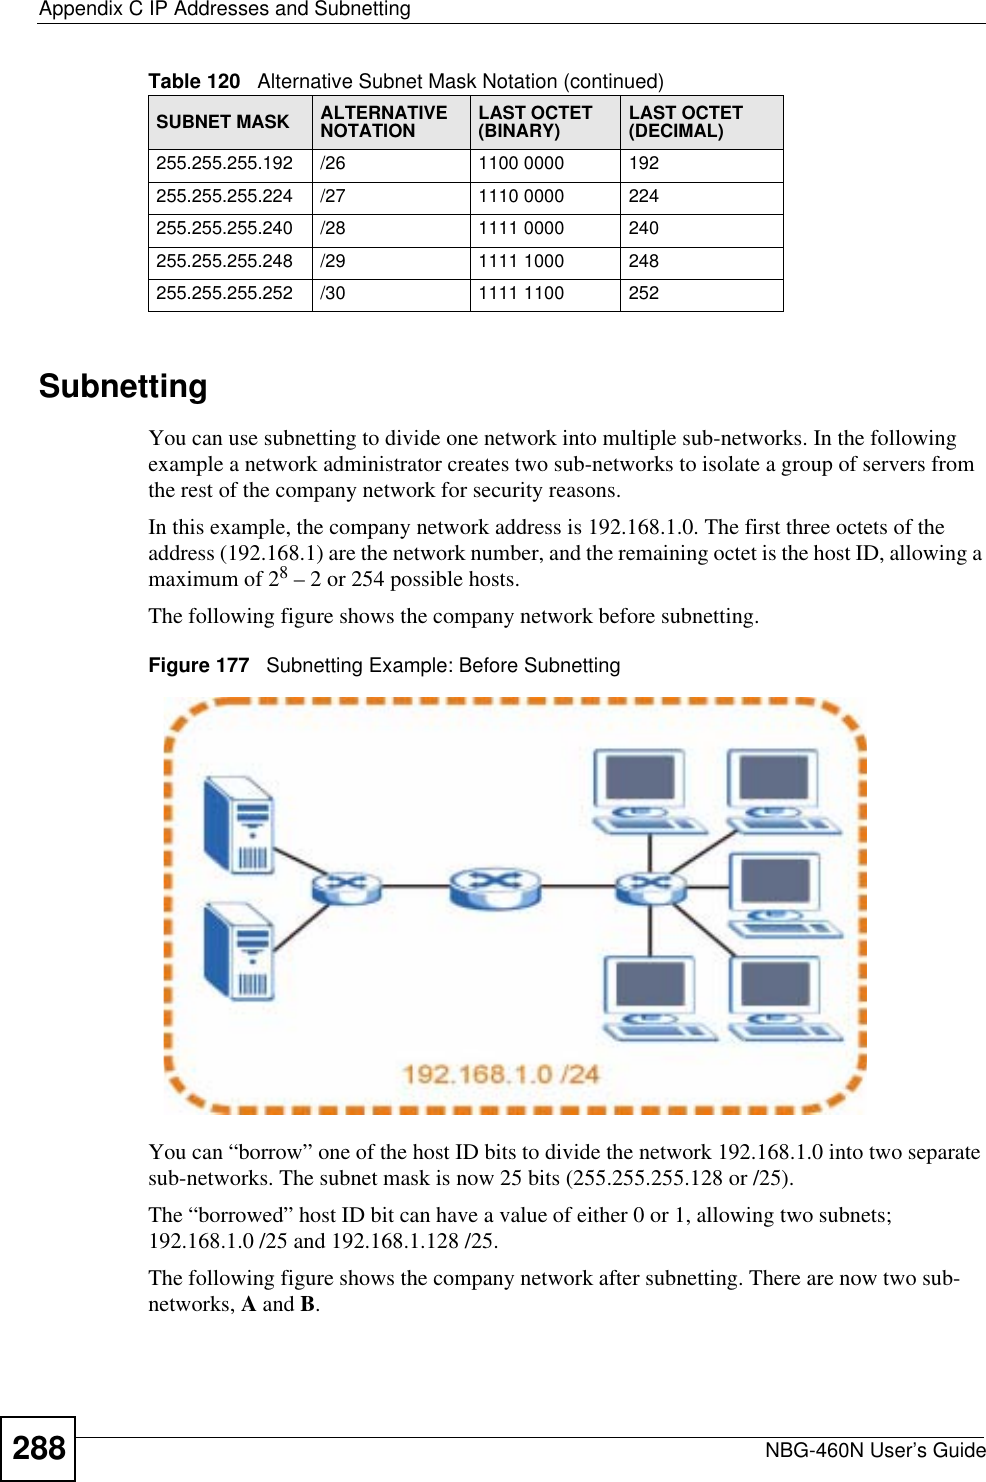 Appendix C IP Addresses and SubnettingNBG-460N User’s Guide288SubnettingYou can use subnetting to divide one network into multiple sub-networks. In the following example a network administrator creates two sub-networks to isolate a group of servers from the rest of the company network for security reasons.In this example, the company network address is 192.168.1.0. The first three octets of the address (192.168.1) are the network number, and the remaining octet is the host ID, allowing a maximum of 28 – 2 or 254 possible hosts.The following figure shows the company network before subnetting.  Figure 177   Subnetting Example: Before SubnettingYou can “borrow” one of the host ID bits to divide the network 192.168.1.0 into two separate sub-networks. The subnet mask is now 25 bits (255.255.255.128 or /25).The “borrowed” host ID bit can have a value of either 0 or 1, allowing two subnets; 192.168.1.0 /25 and 192.168.1.128 /25. The following figure shows the company network after subnetting. There are now two sub-networks, A and B.255.255.255.192 /26 1100 0000 192255.255.255.224 /27 1110 0000 224255.255.255.240 /28 1111 0000 240255.255.255.248 /29 1111 1000 248255.255.255.252 /30 1111 1100 252Table 120   Alternative Subnet Mask Notation (continued)SUBNET MASK ALTERNATIVENOTATION LAST OCTET (BINARY) LAST OCTET (DECIMAL)